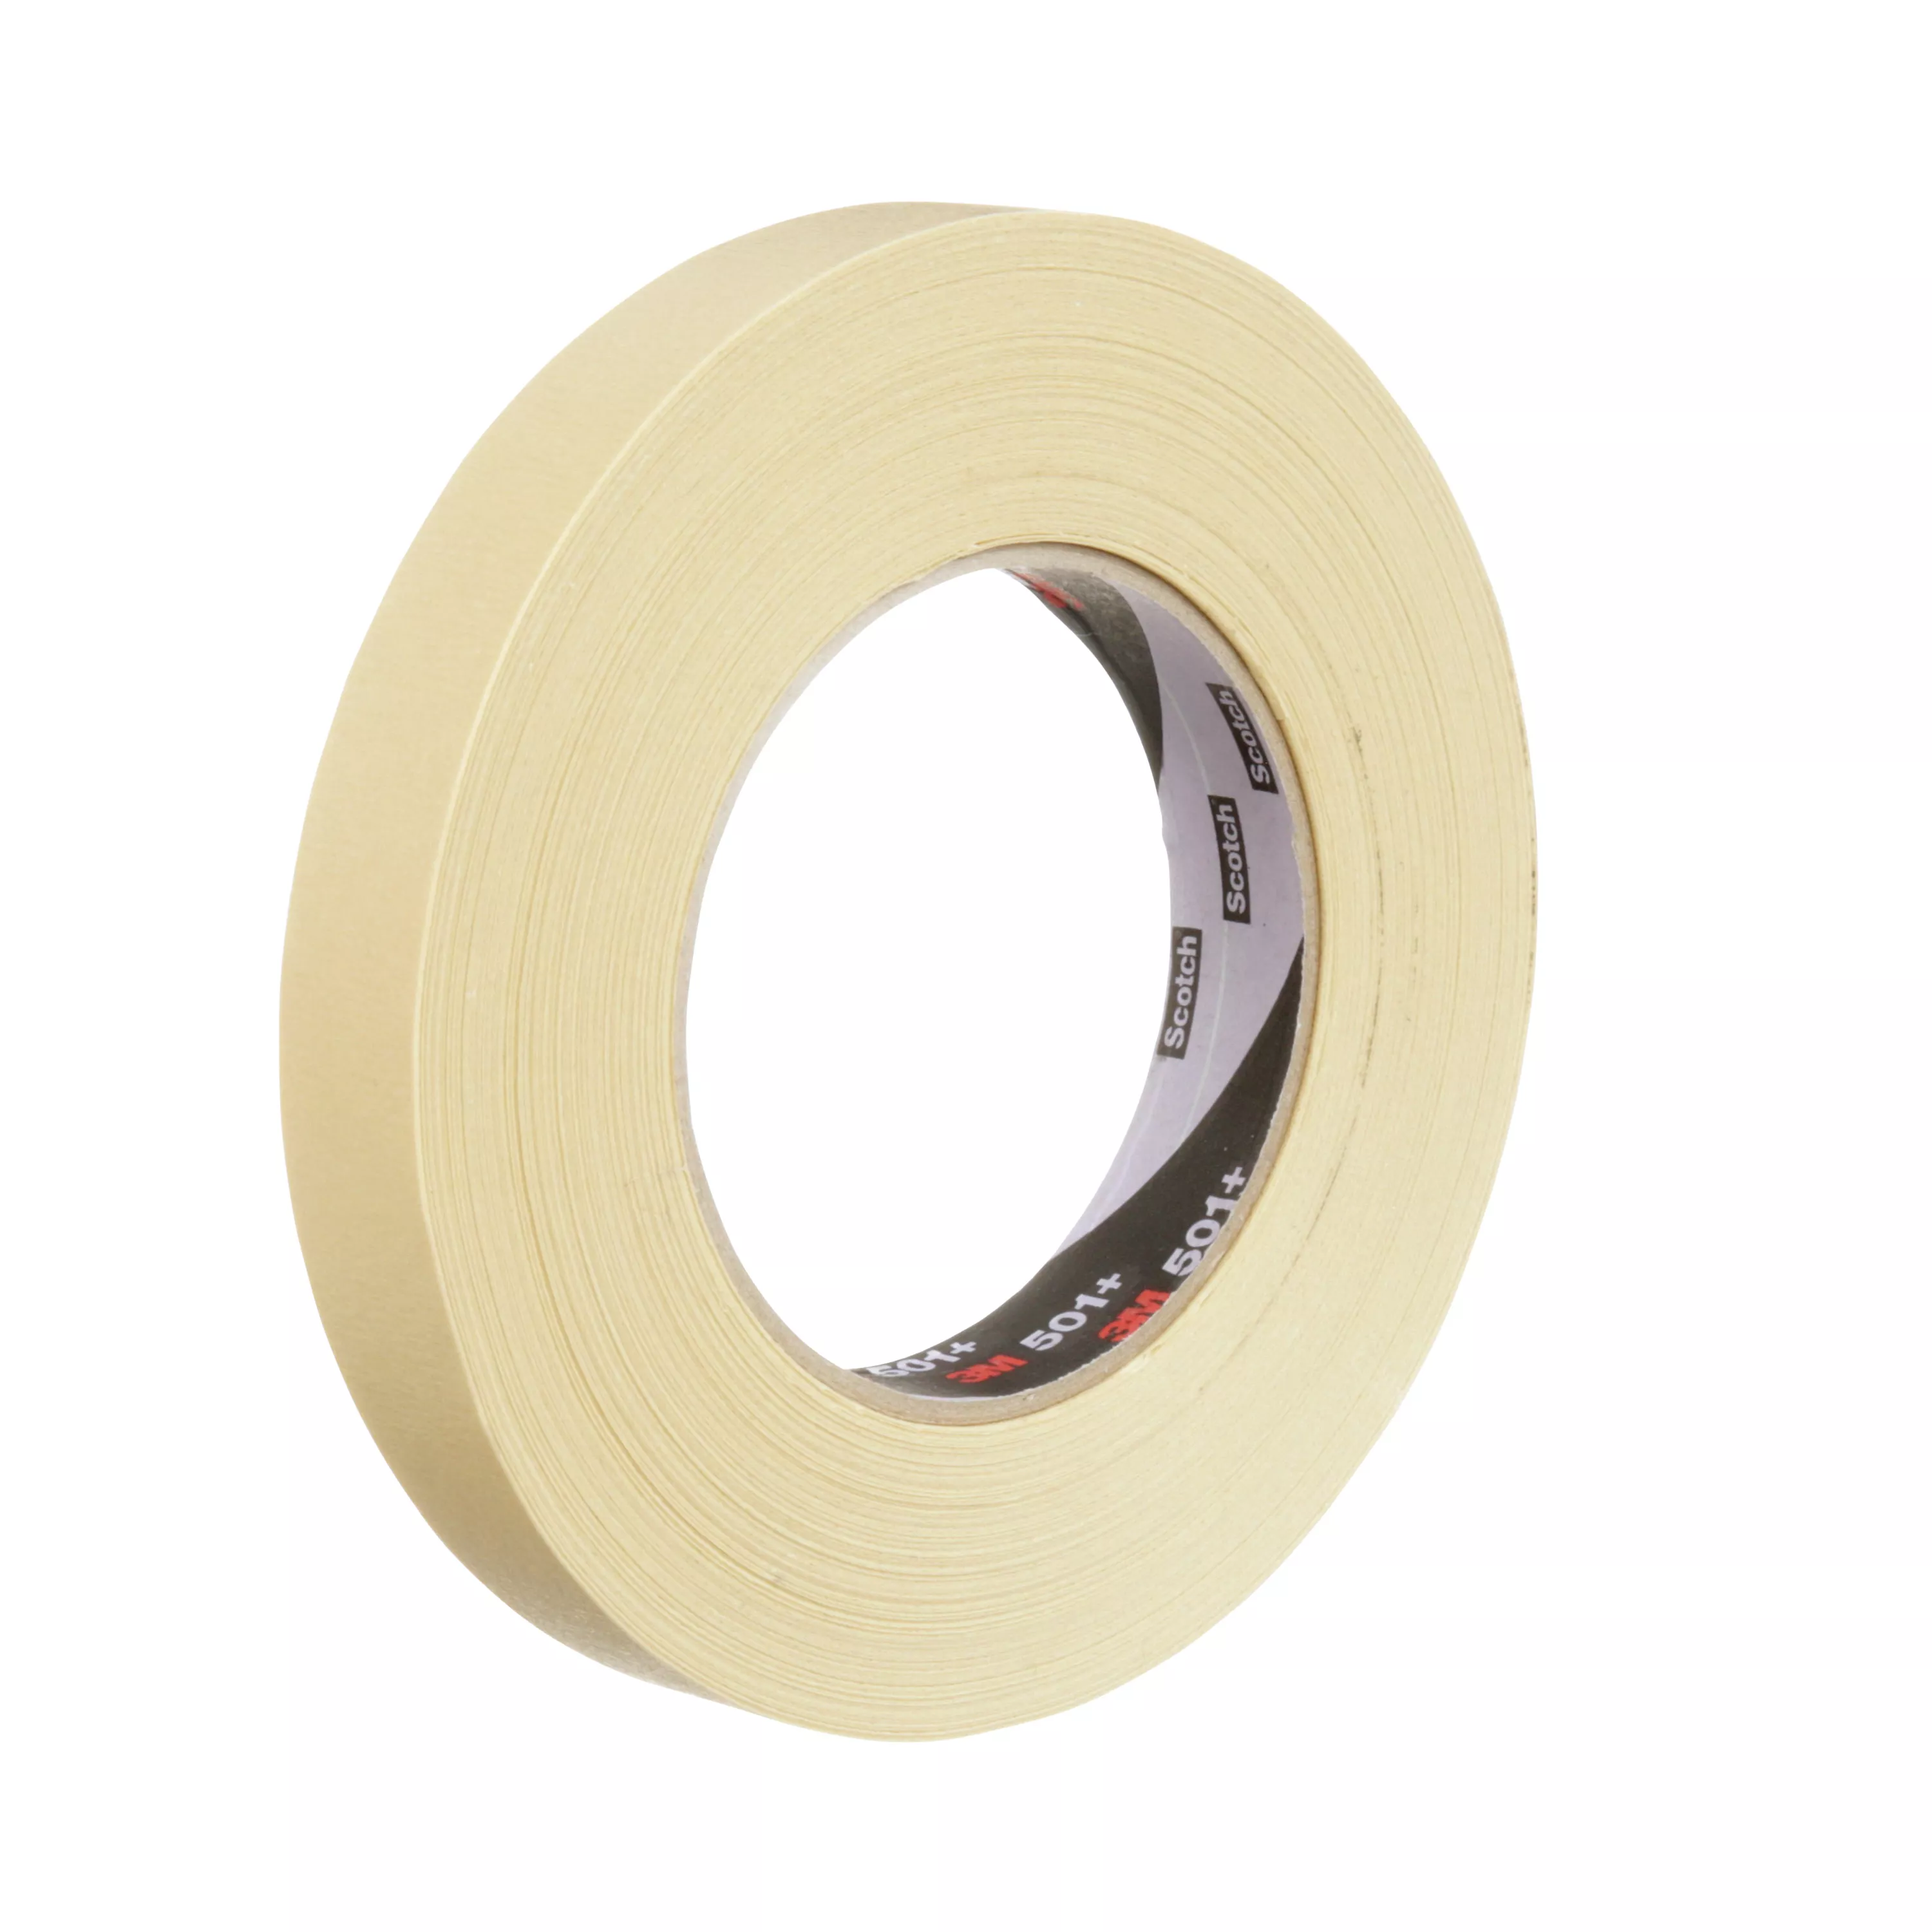 3M™ Specialty High Temperature Masking Tape 501+, Tan, 18 mm x 55 m, 7.3
mil, 48 Rolls/Case